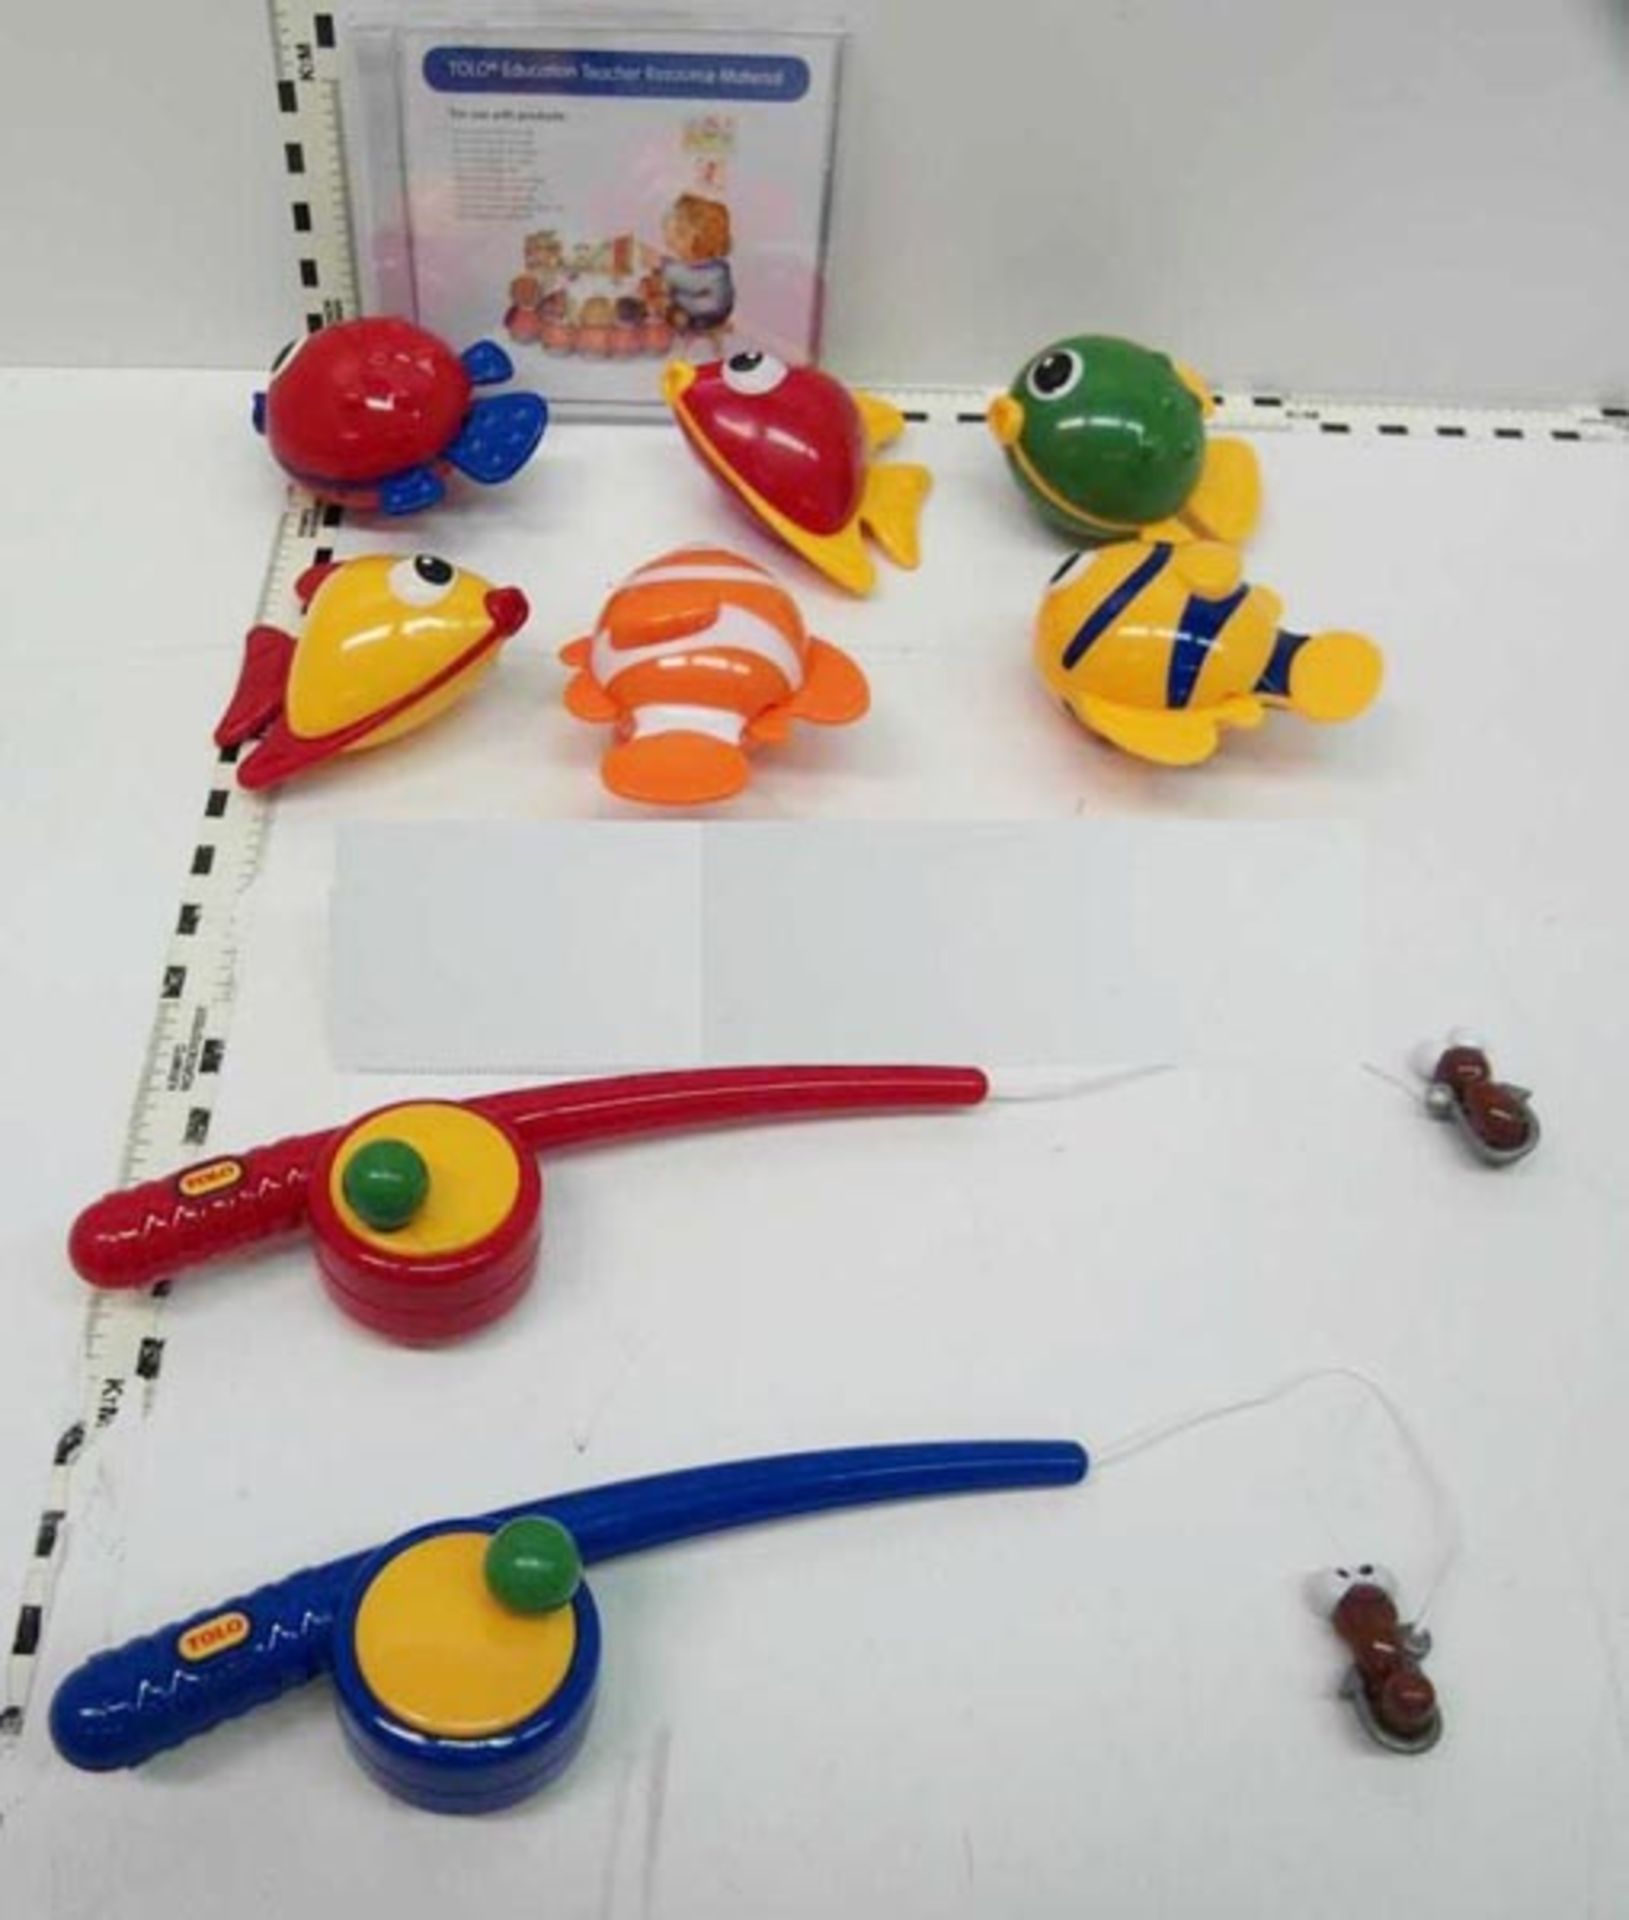 V Brand New Tolo Magnetic Fishing Set Age 18mths+ ISP £17.99 (Amazon) X 2 YOUR BID PRICE TO BE